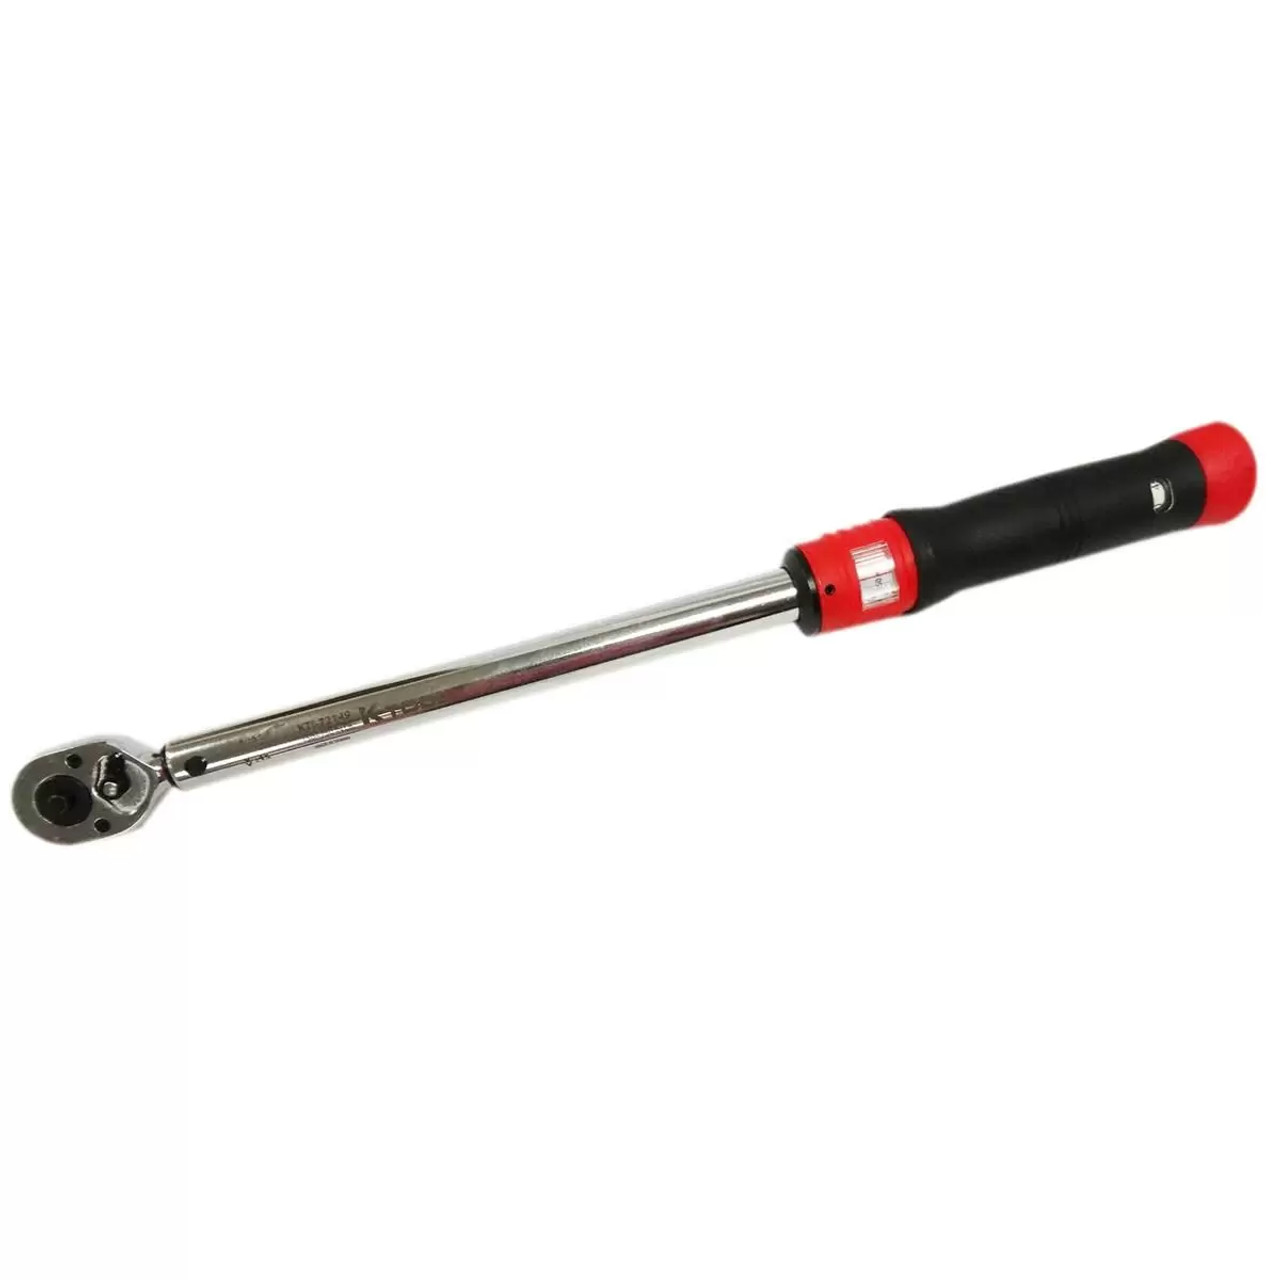 Torque Wrench 3/8 Dr 150-750 in/lbs